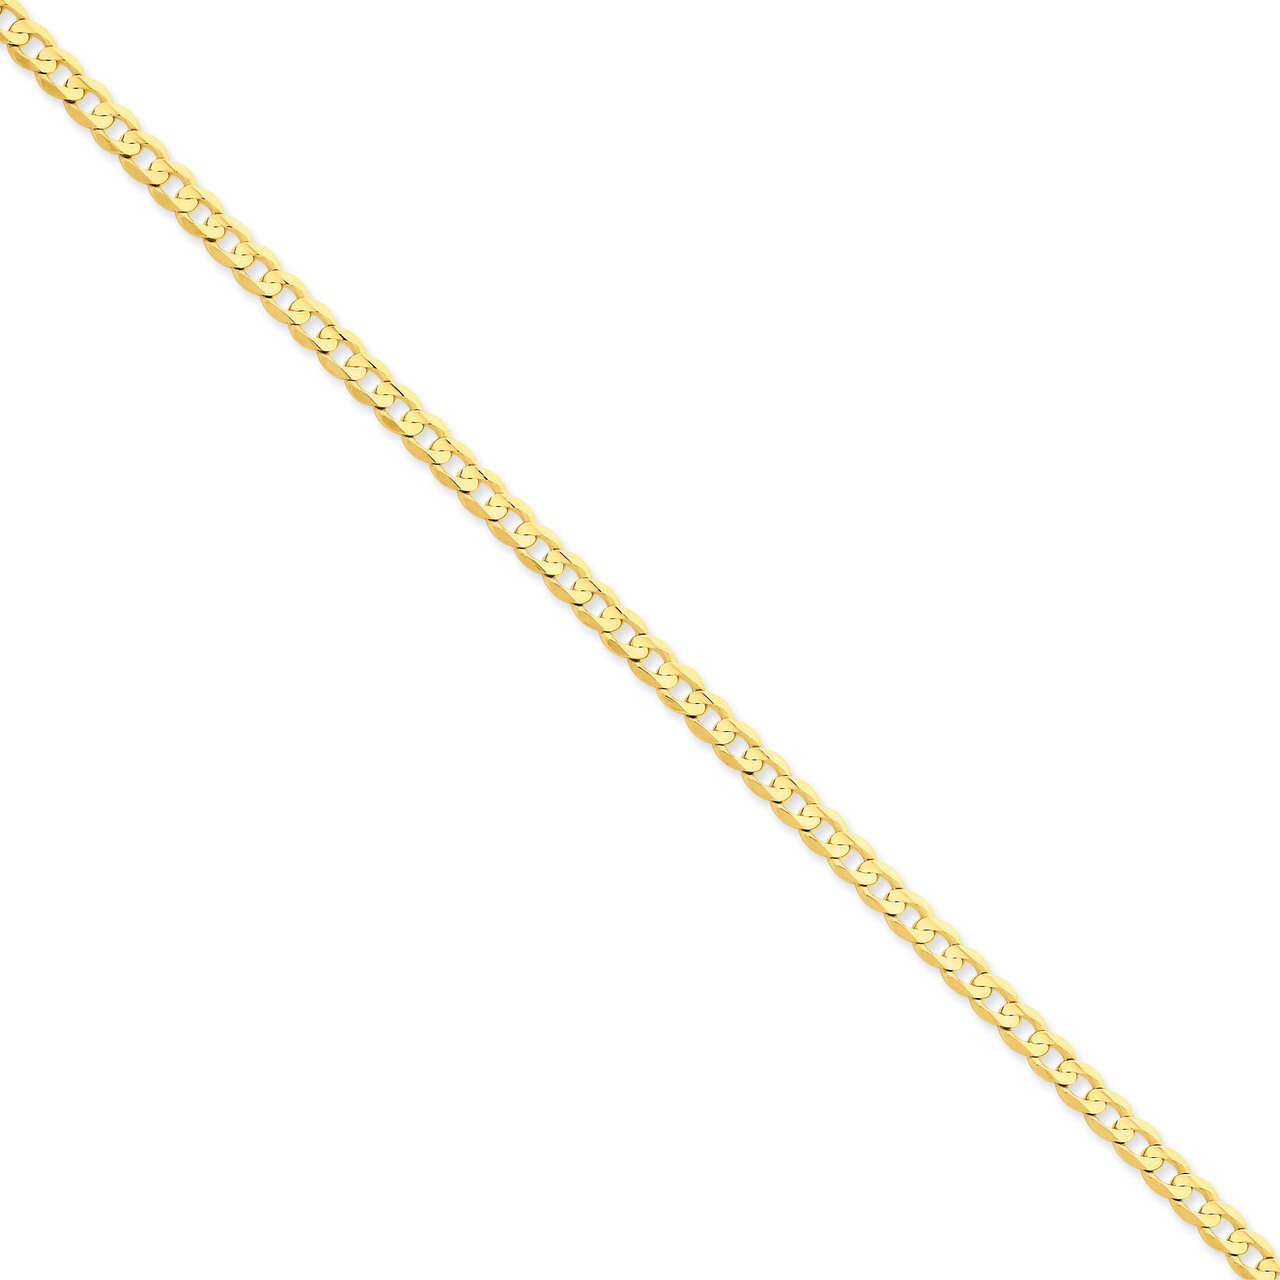 4.5mm Open Concave Curb Chain 7 Inch 14k Gold LCR120-7